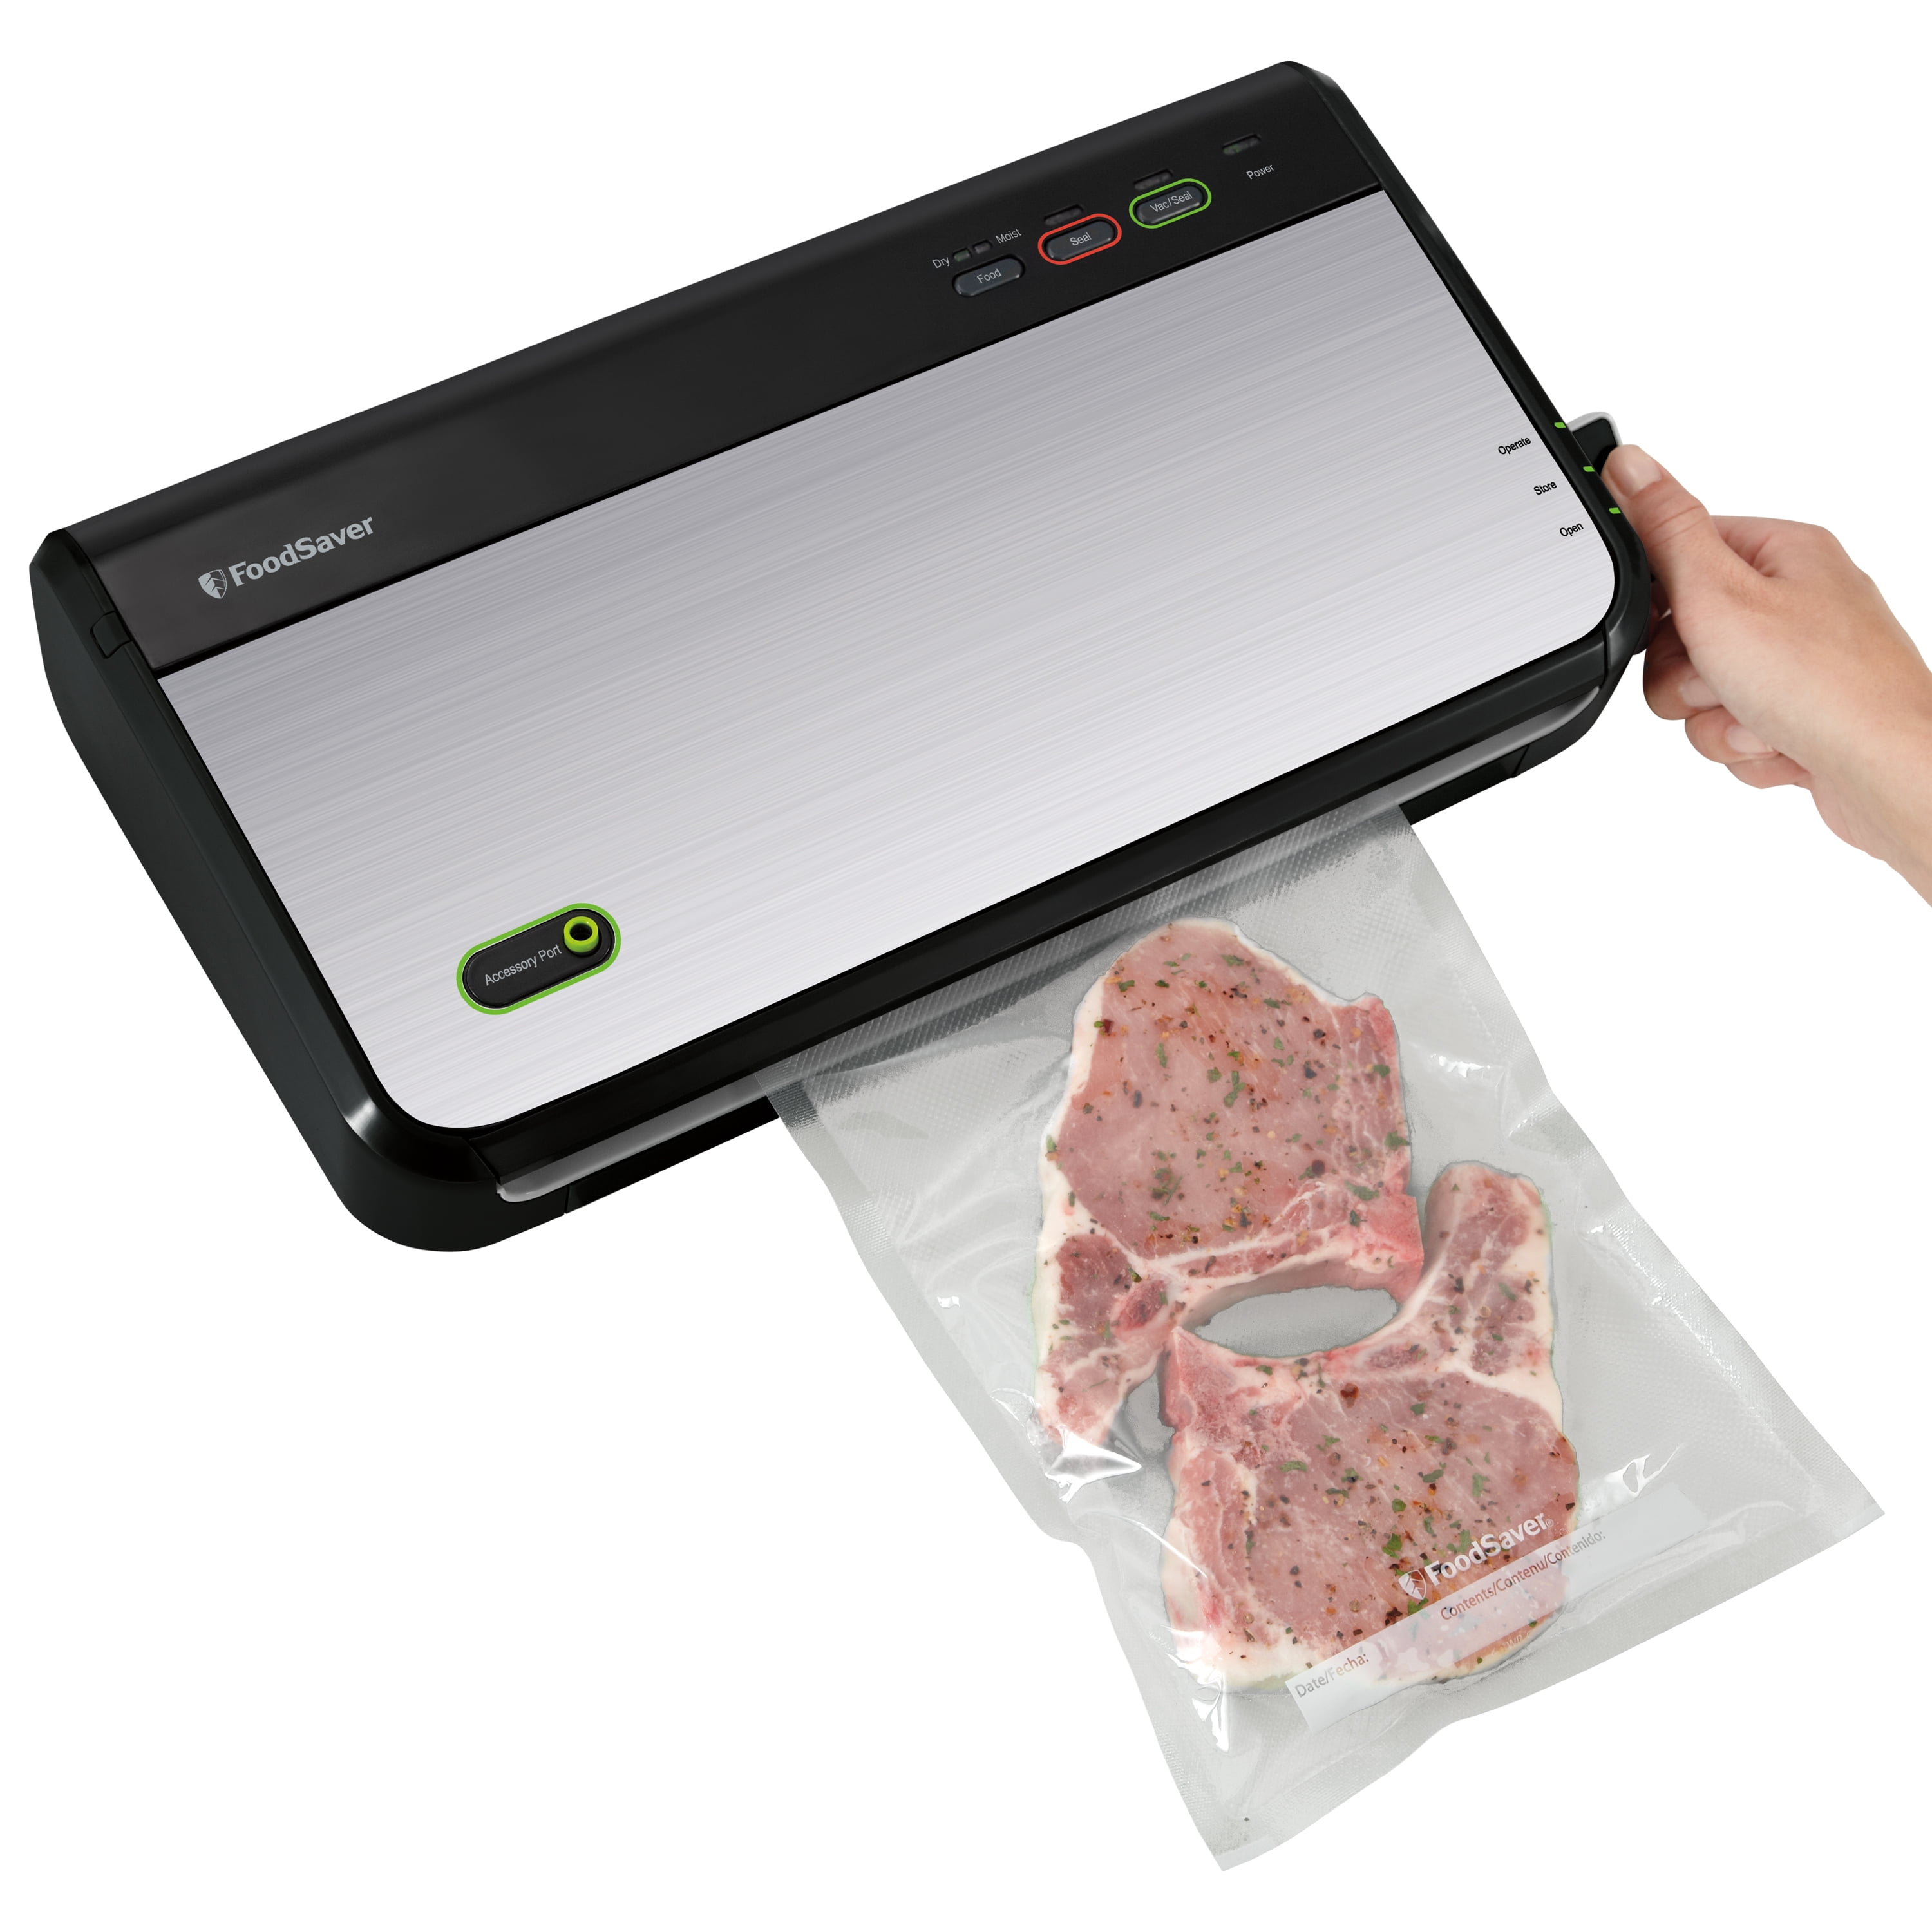 Food Saver Vacuum Sealer Machine Seal A Meal Sealing Heat System Easy to Use